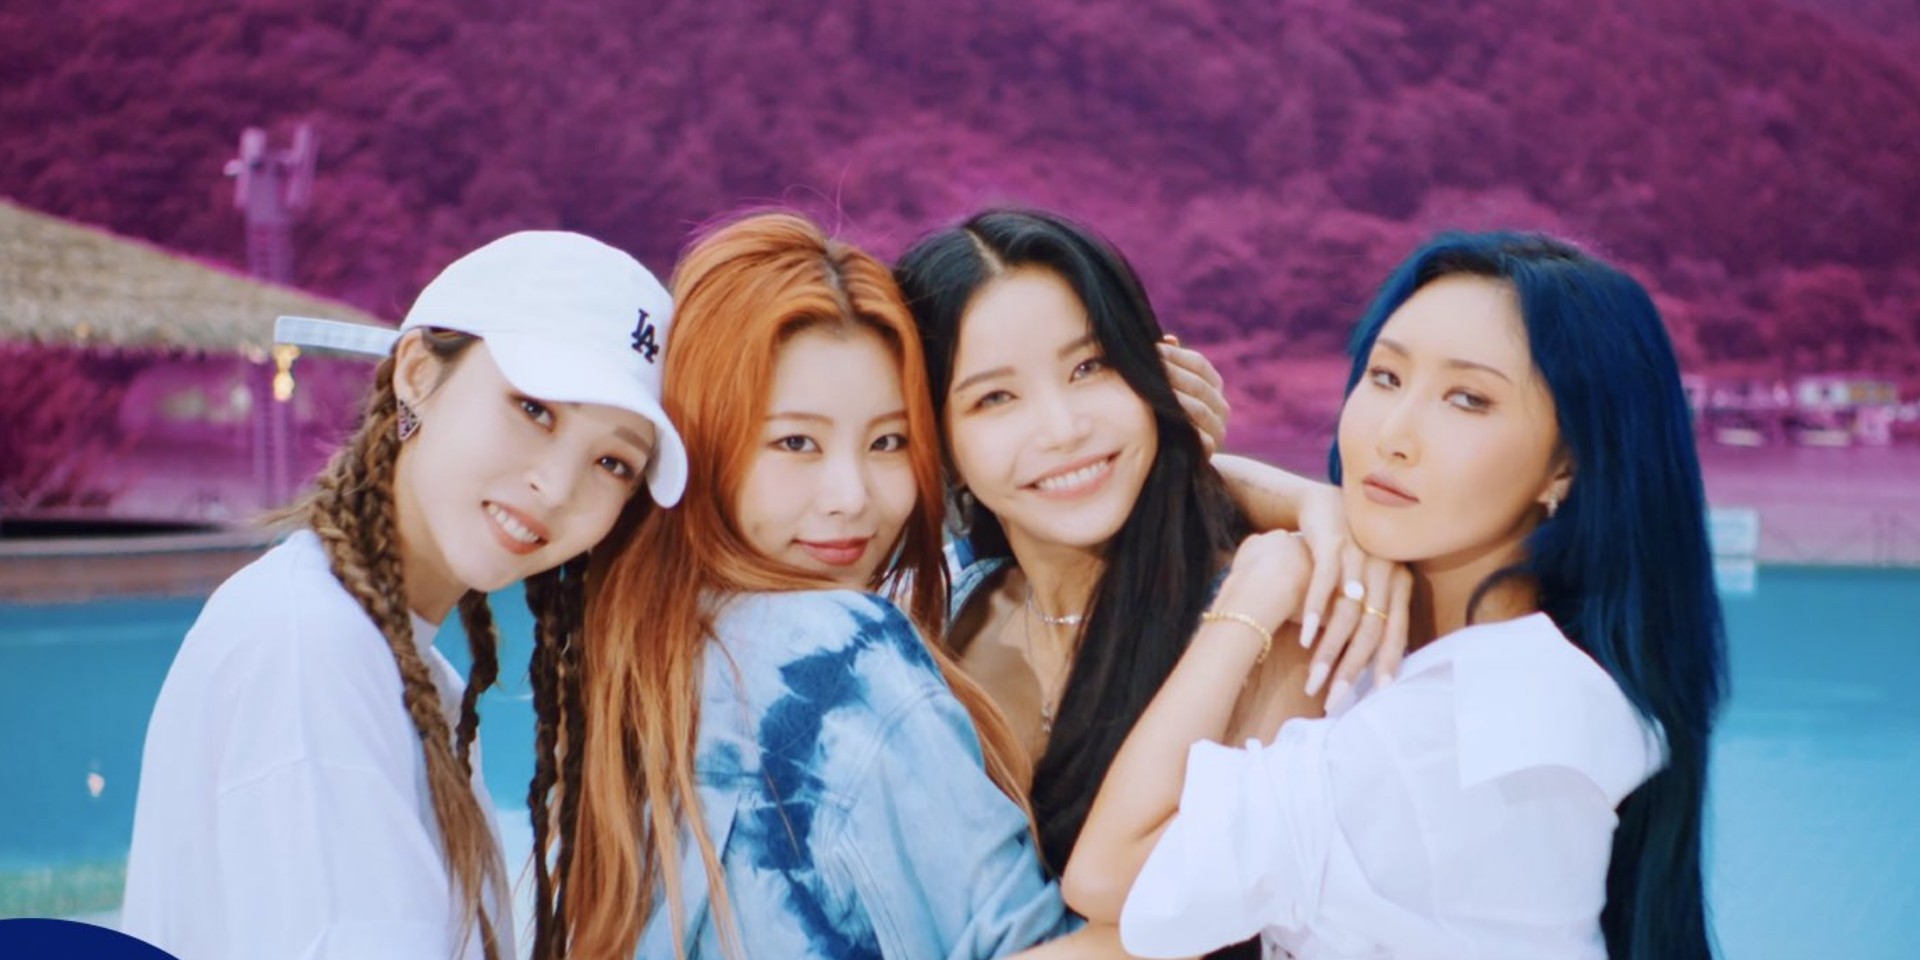 MAMAMOO reimagine old favourites in new album, 'I SAY MAMAMOO: THE BEST' – listen